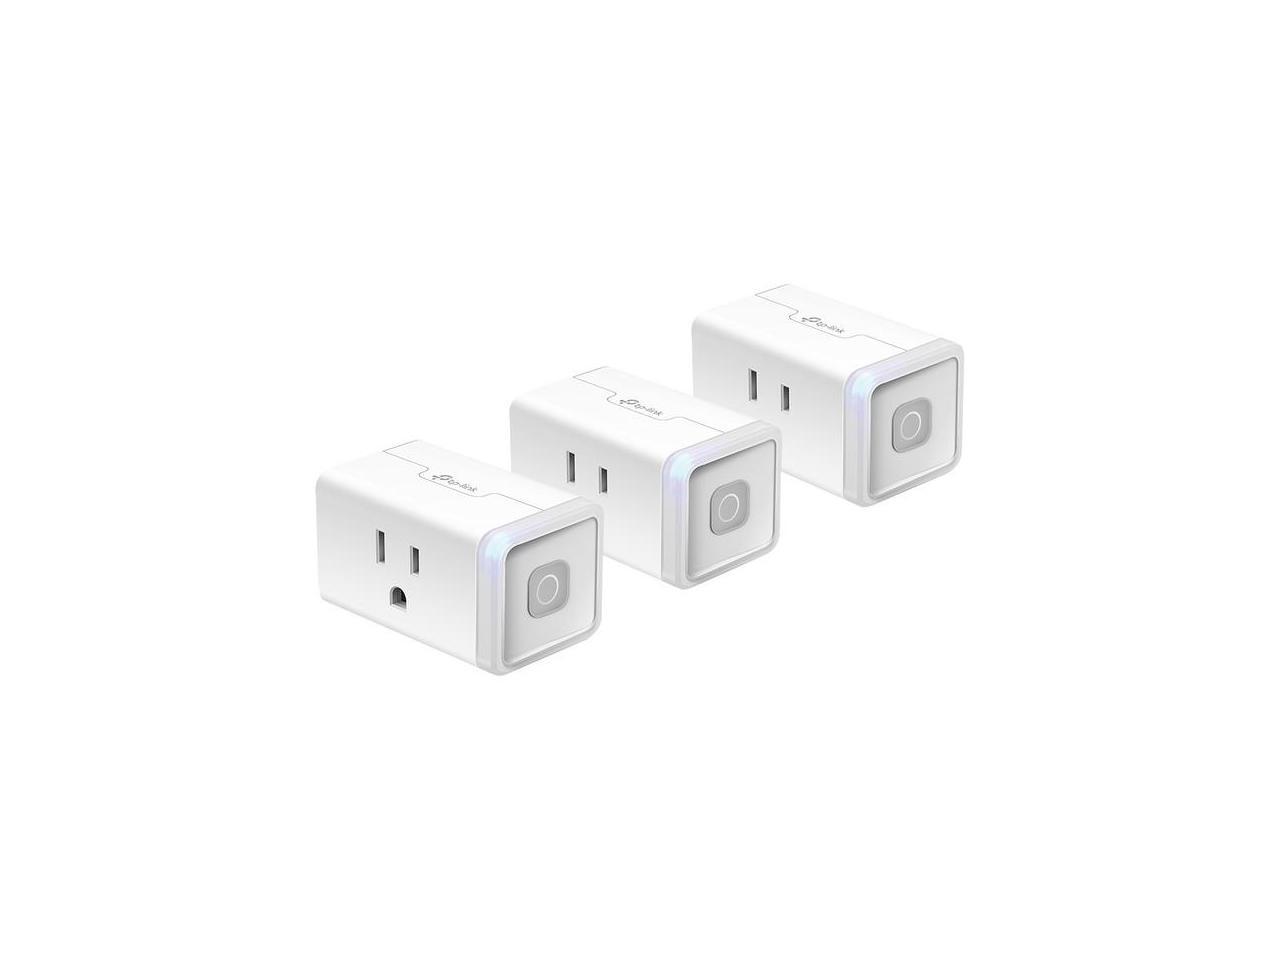 Kasa Smart Plug by TP-Link, Smart Home WiFi Outlet Works with Alexa, Echo, Google Home & IFTTT, No Hub Required, Remote Control, 12 Amp, UL Certified, 3-Pack (HS103P3)